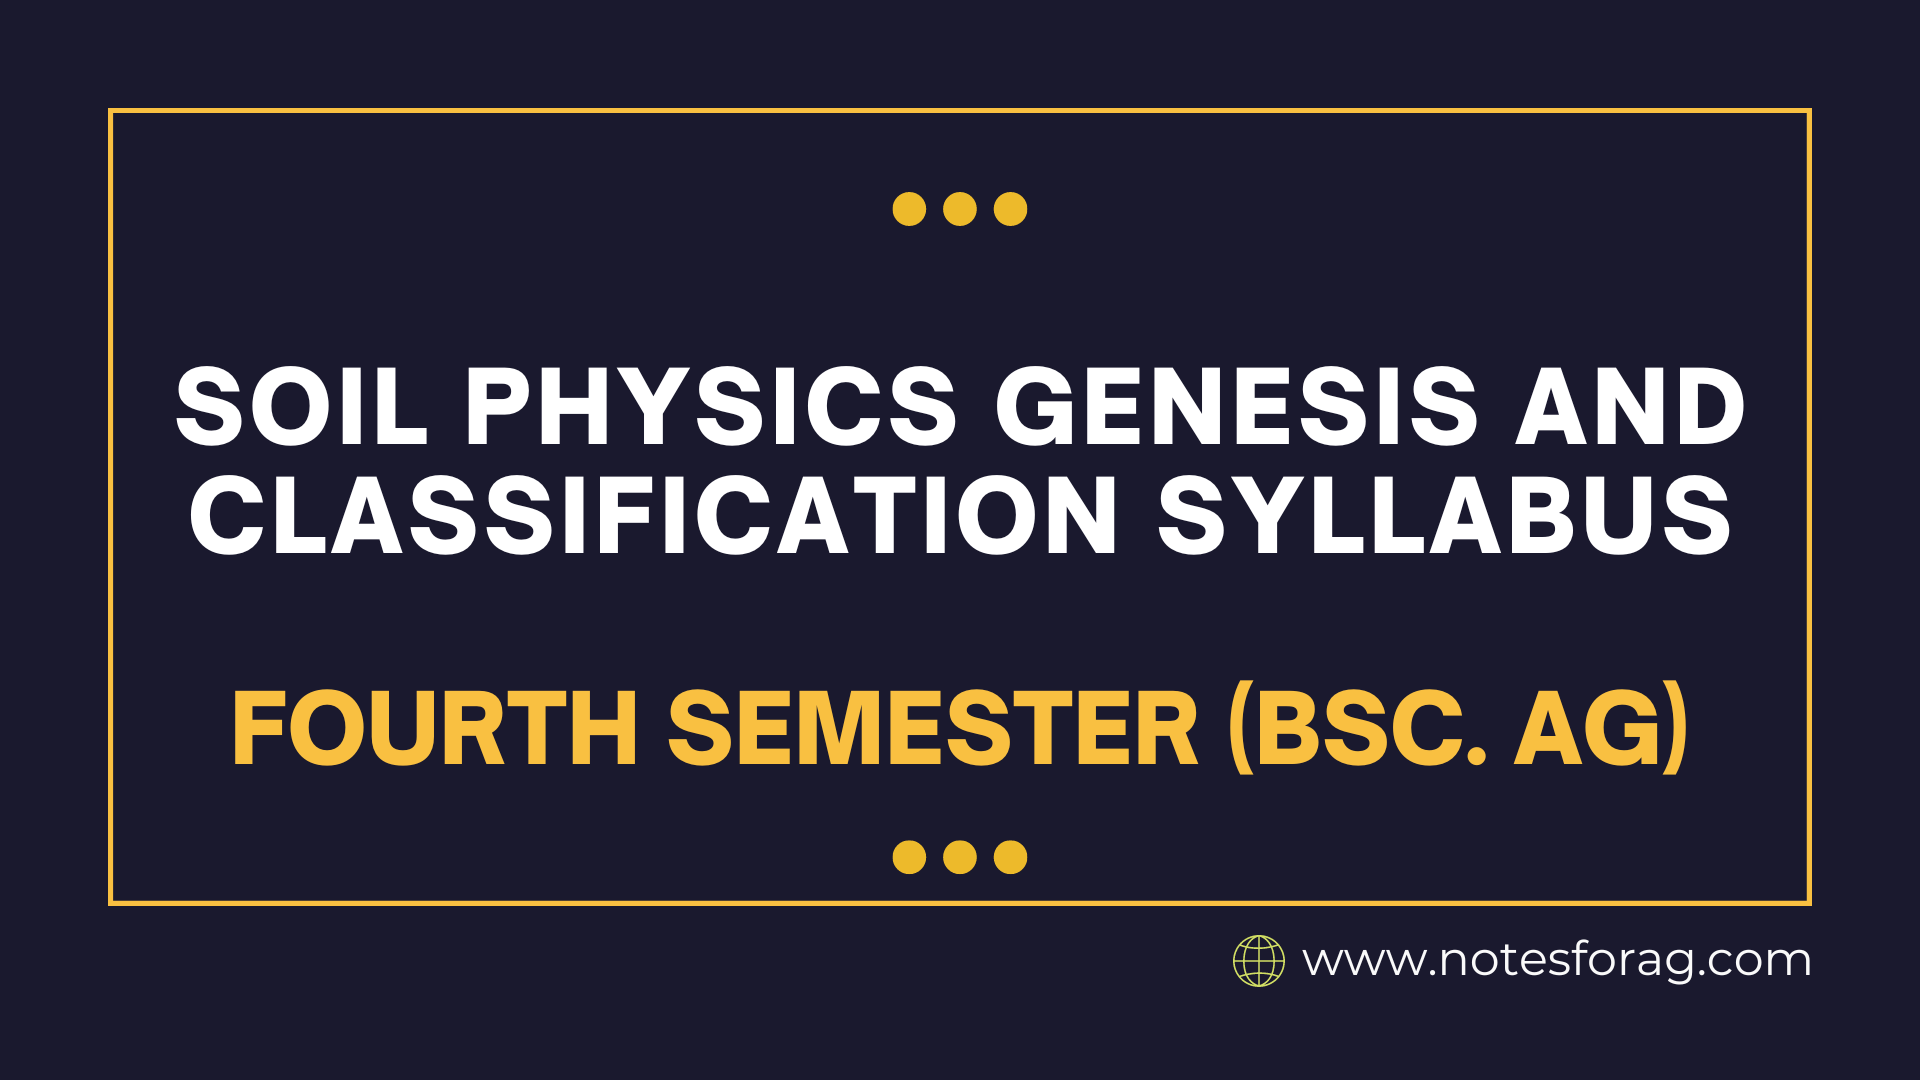 Soil Physics Genesis and Classification Syllabus – Fourth Semester (BSc.AG)